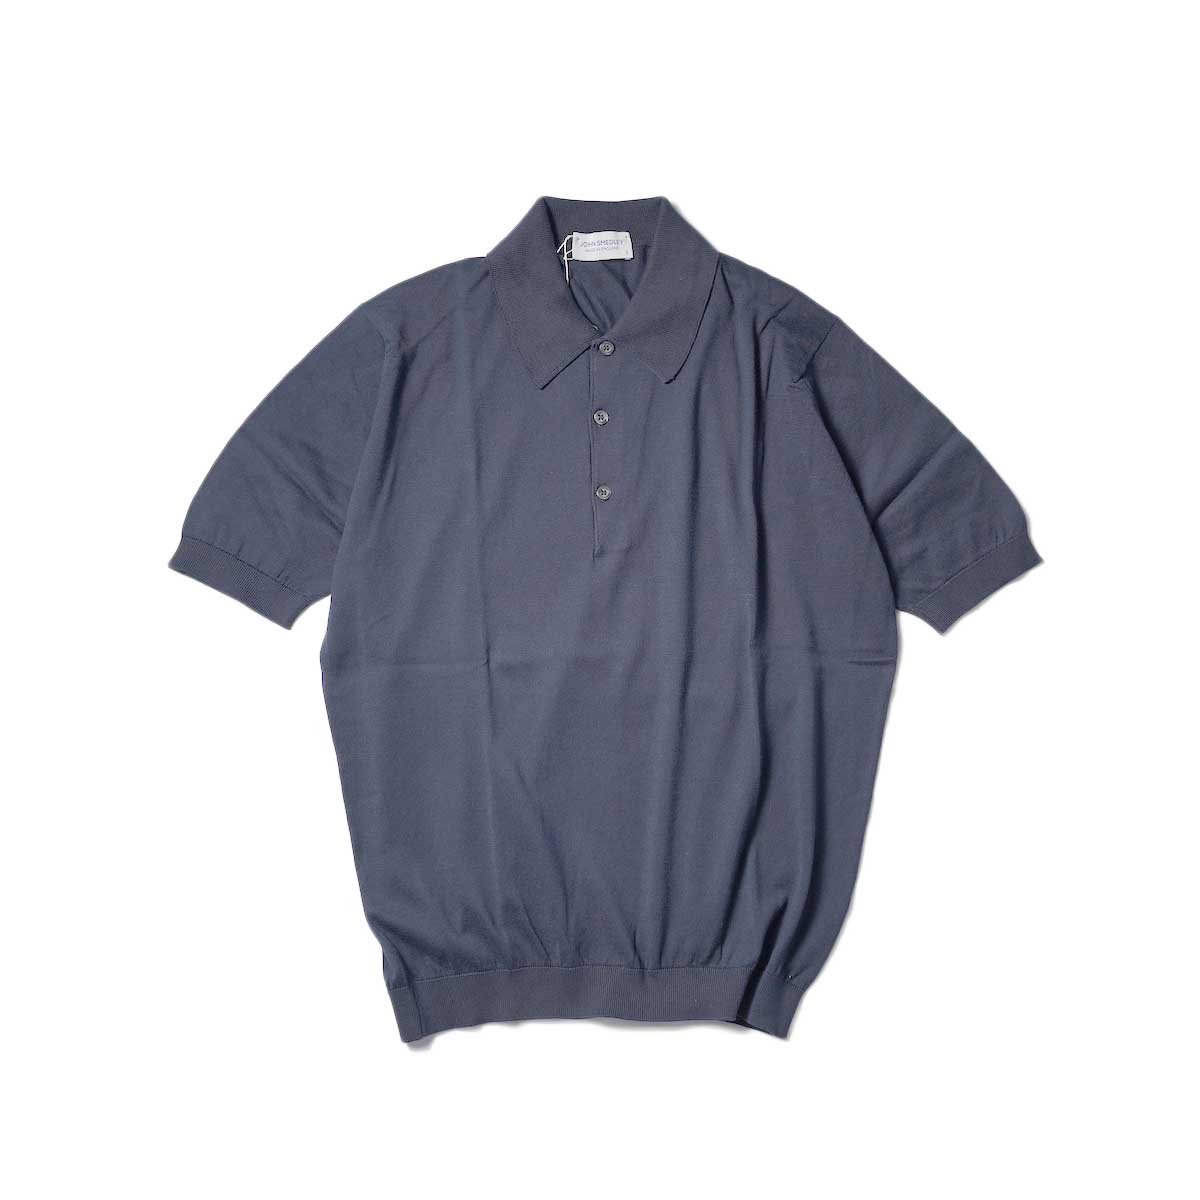 JOHN SMEDLEY / ISIS S/S Knit Polo (Navy)正面